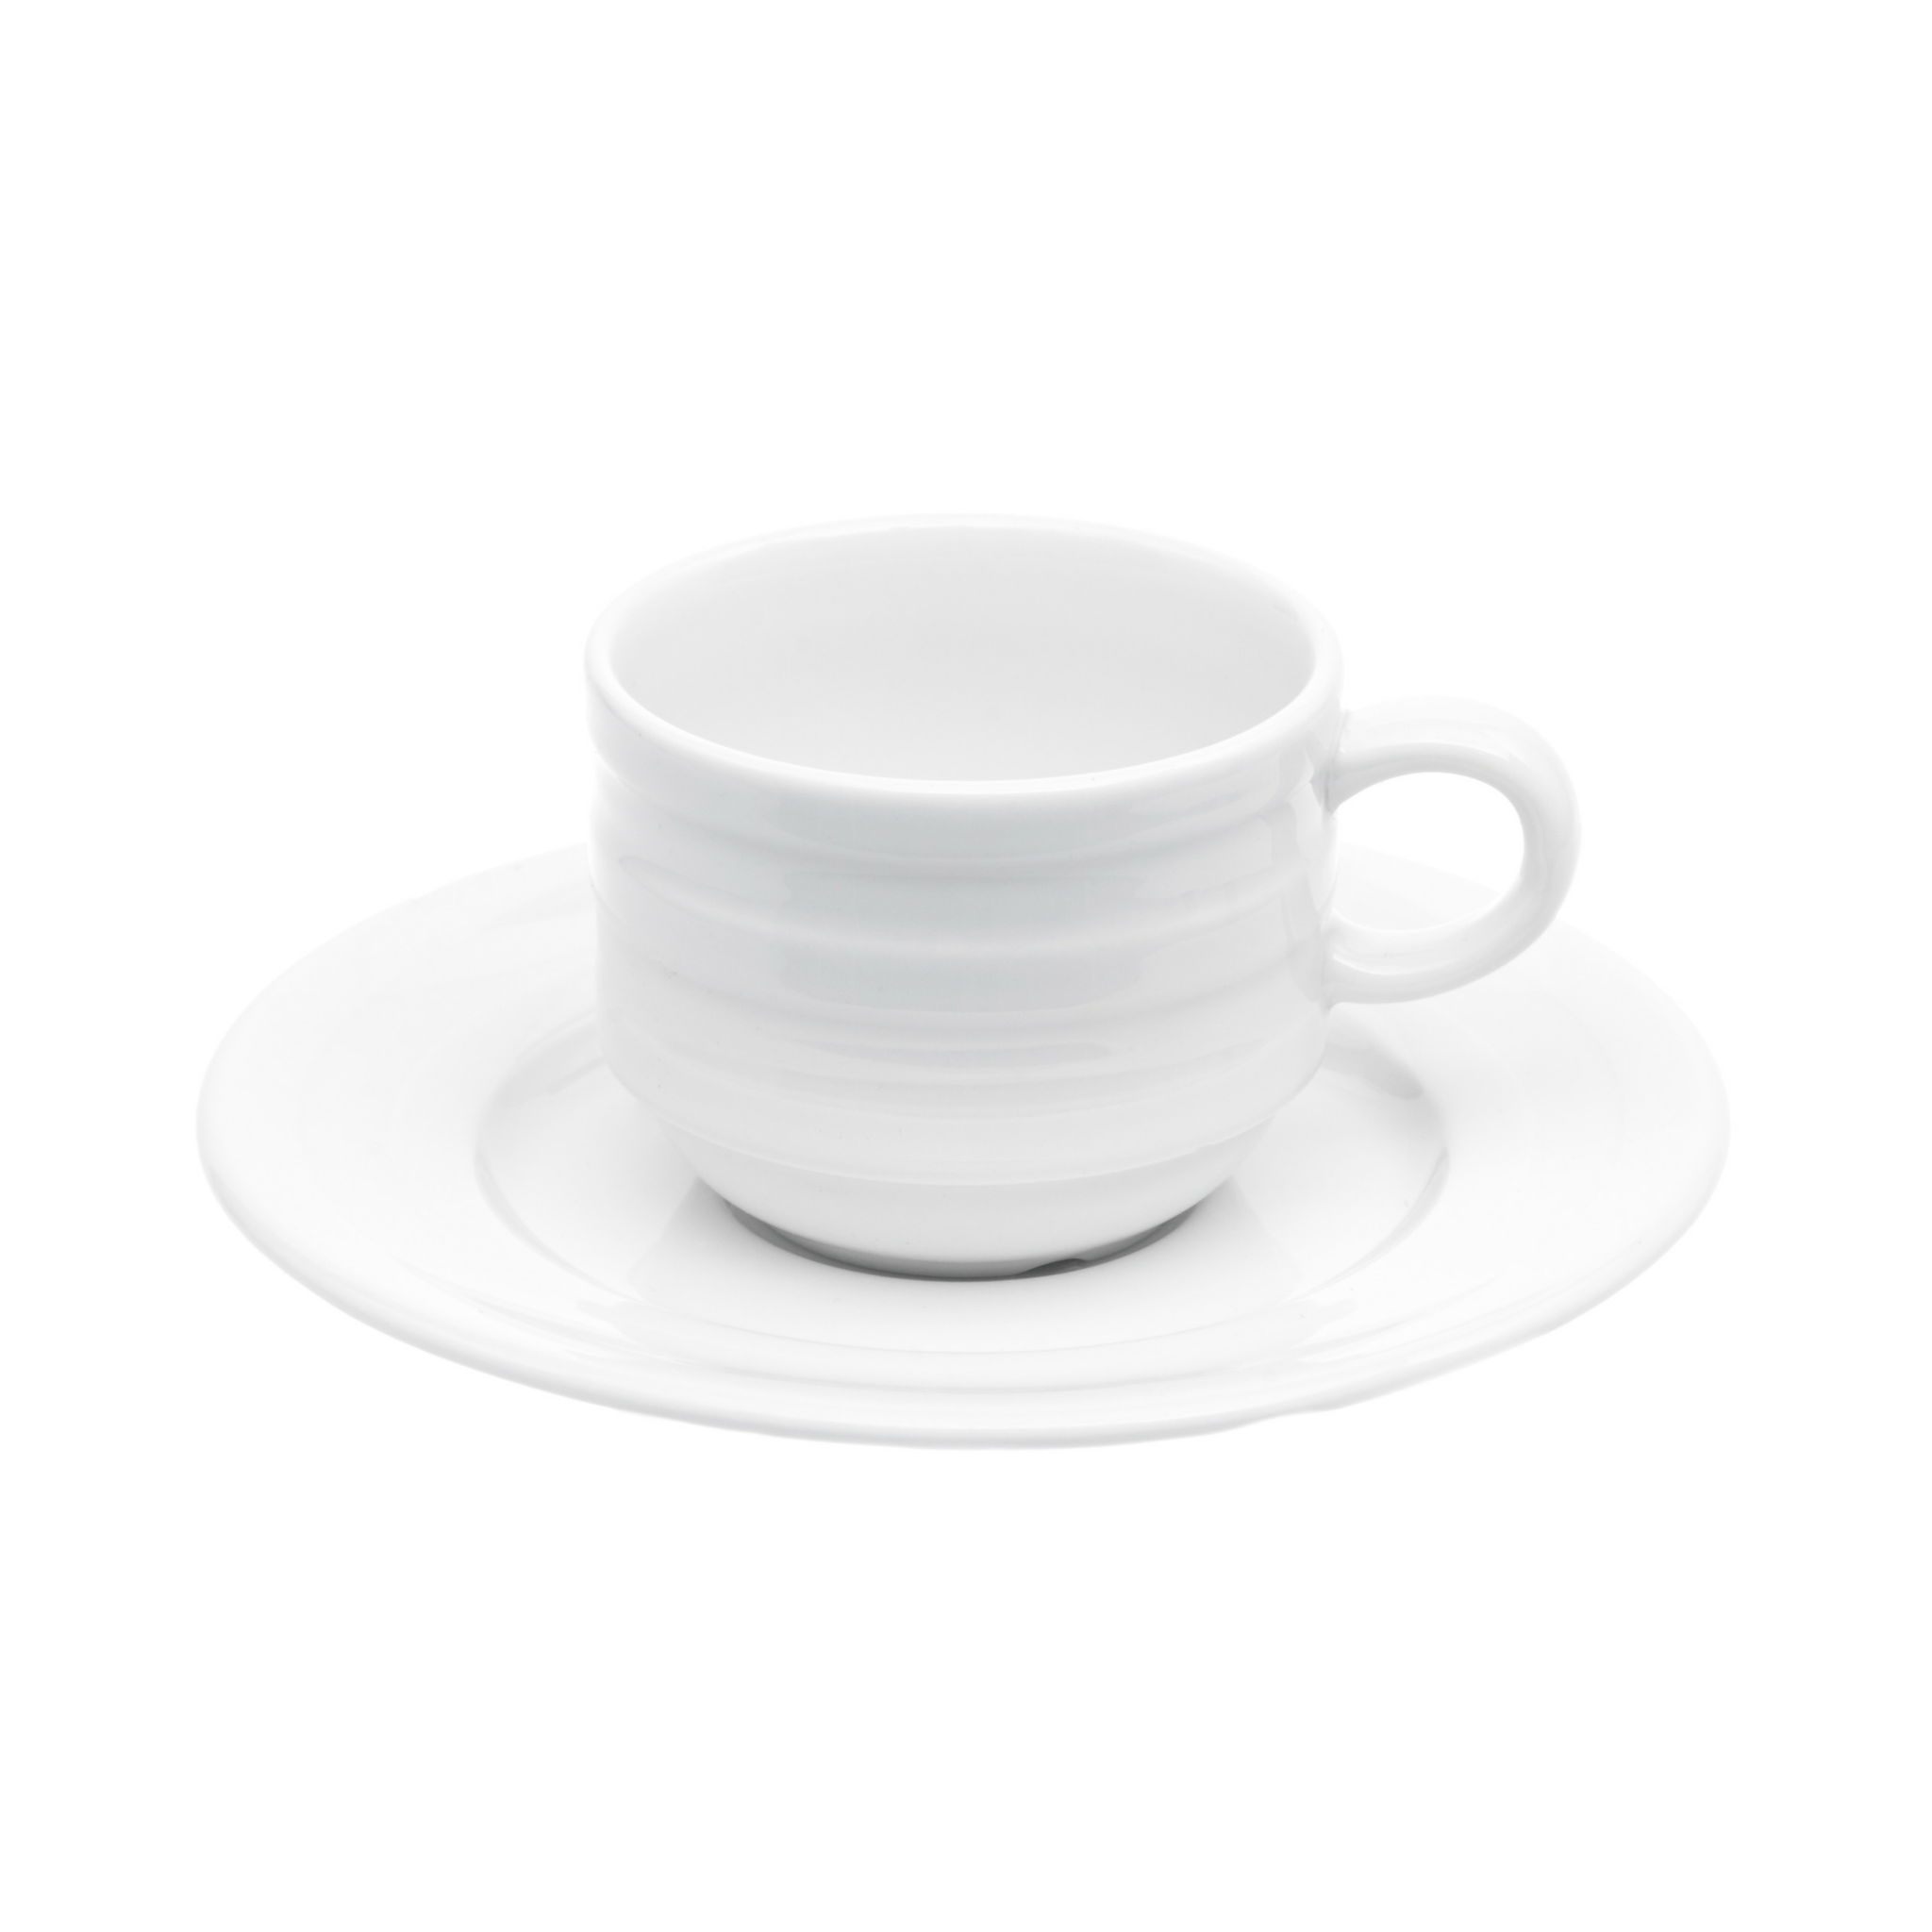 Set of 2 Espresso Cups and Saucers